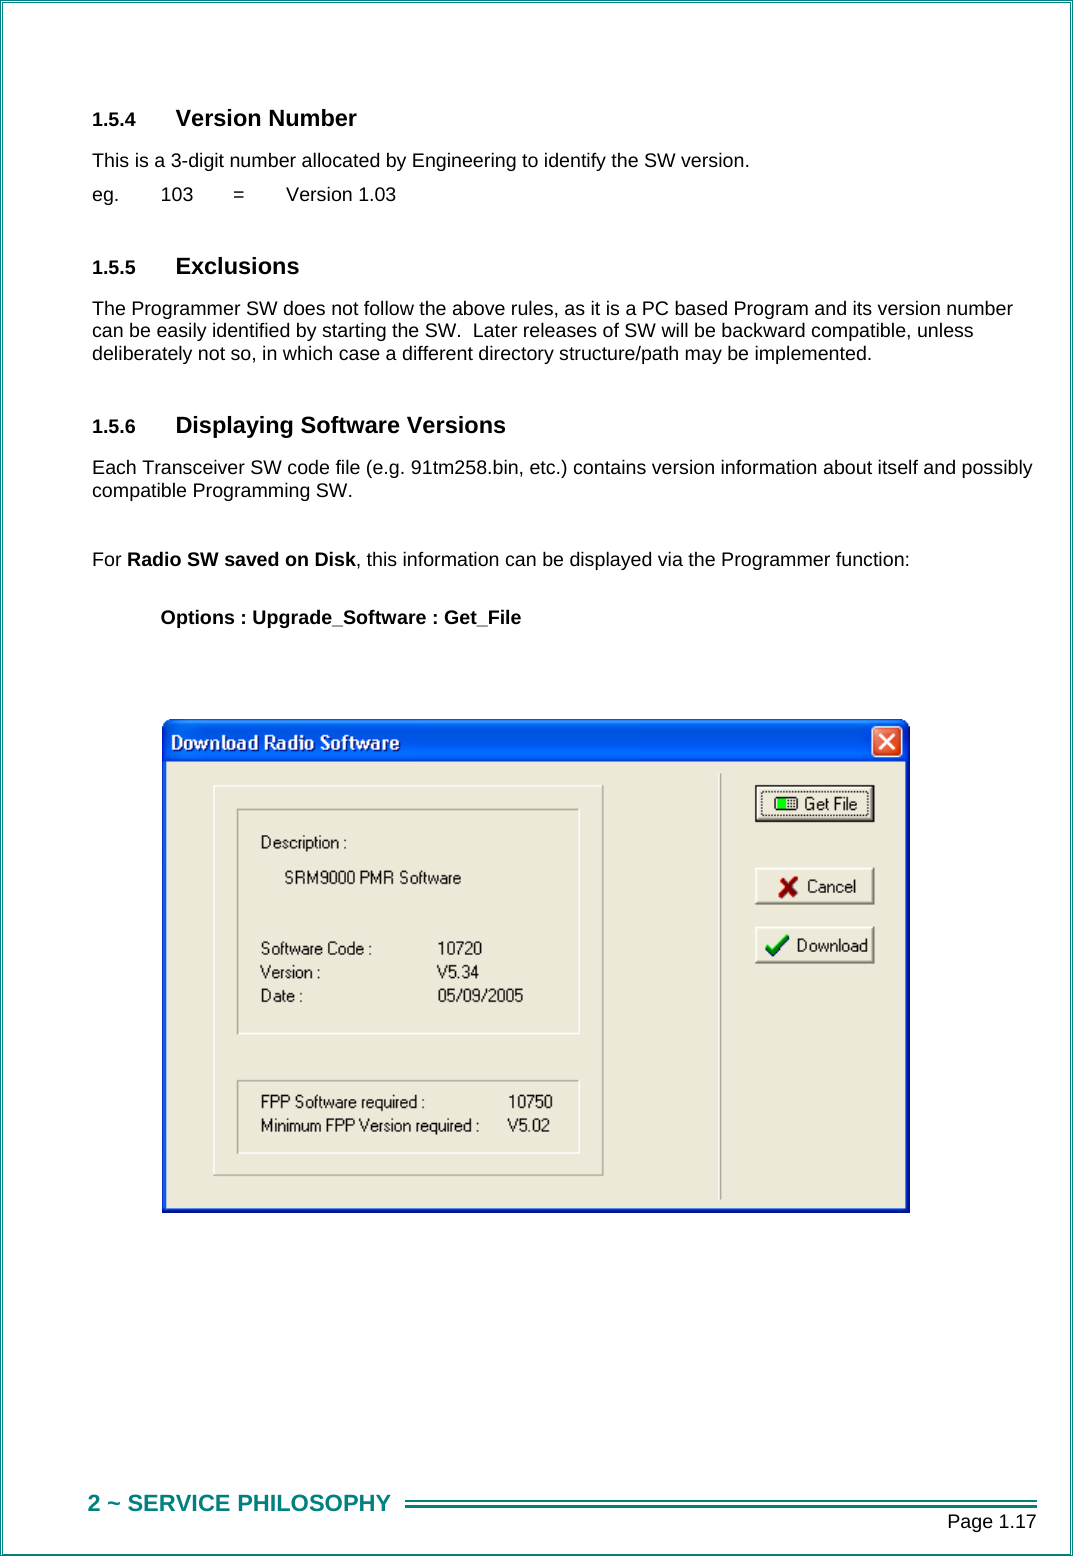      Page 1.17 2 ~ SERVICE PHILOSOPHY 1.5.4  Version Number This is a 3-digit number allocated by Engineering to identify the SW version. eg.   103   =   Version 1.03  1.5.5  Exclusions The Programmer SW does not follow the above rules, as it is a PC based Program and its version number can be easily identified by starting the SW.  Later releases of SW will be backward compatible, unless deliberately not so, in which case a different directory structure/path may be implemented.  1.5.6  Displaying Software Versions Each Transceiver SW code file (e.g. 91tm258.bin, etc.) contains version information about itself and possibly compatible Programming SW.      For Radio SW saved on Disk, this information can be displayed via the Programmer function:   Options : Upgrade_Software : Get_File                     